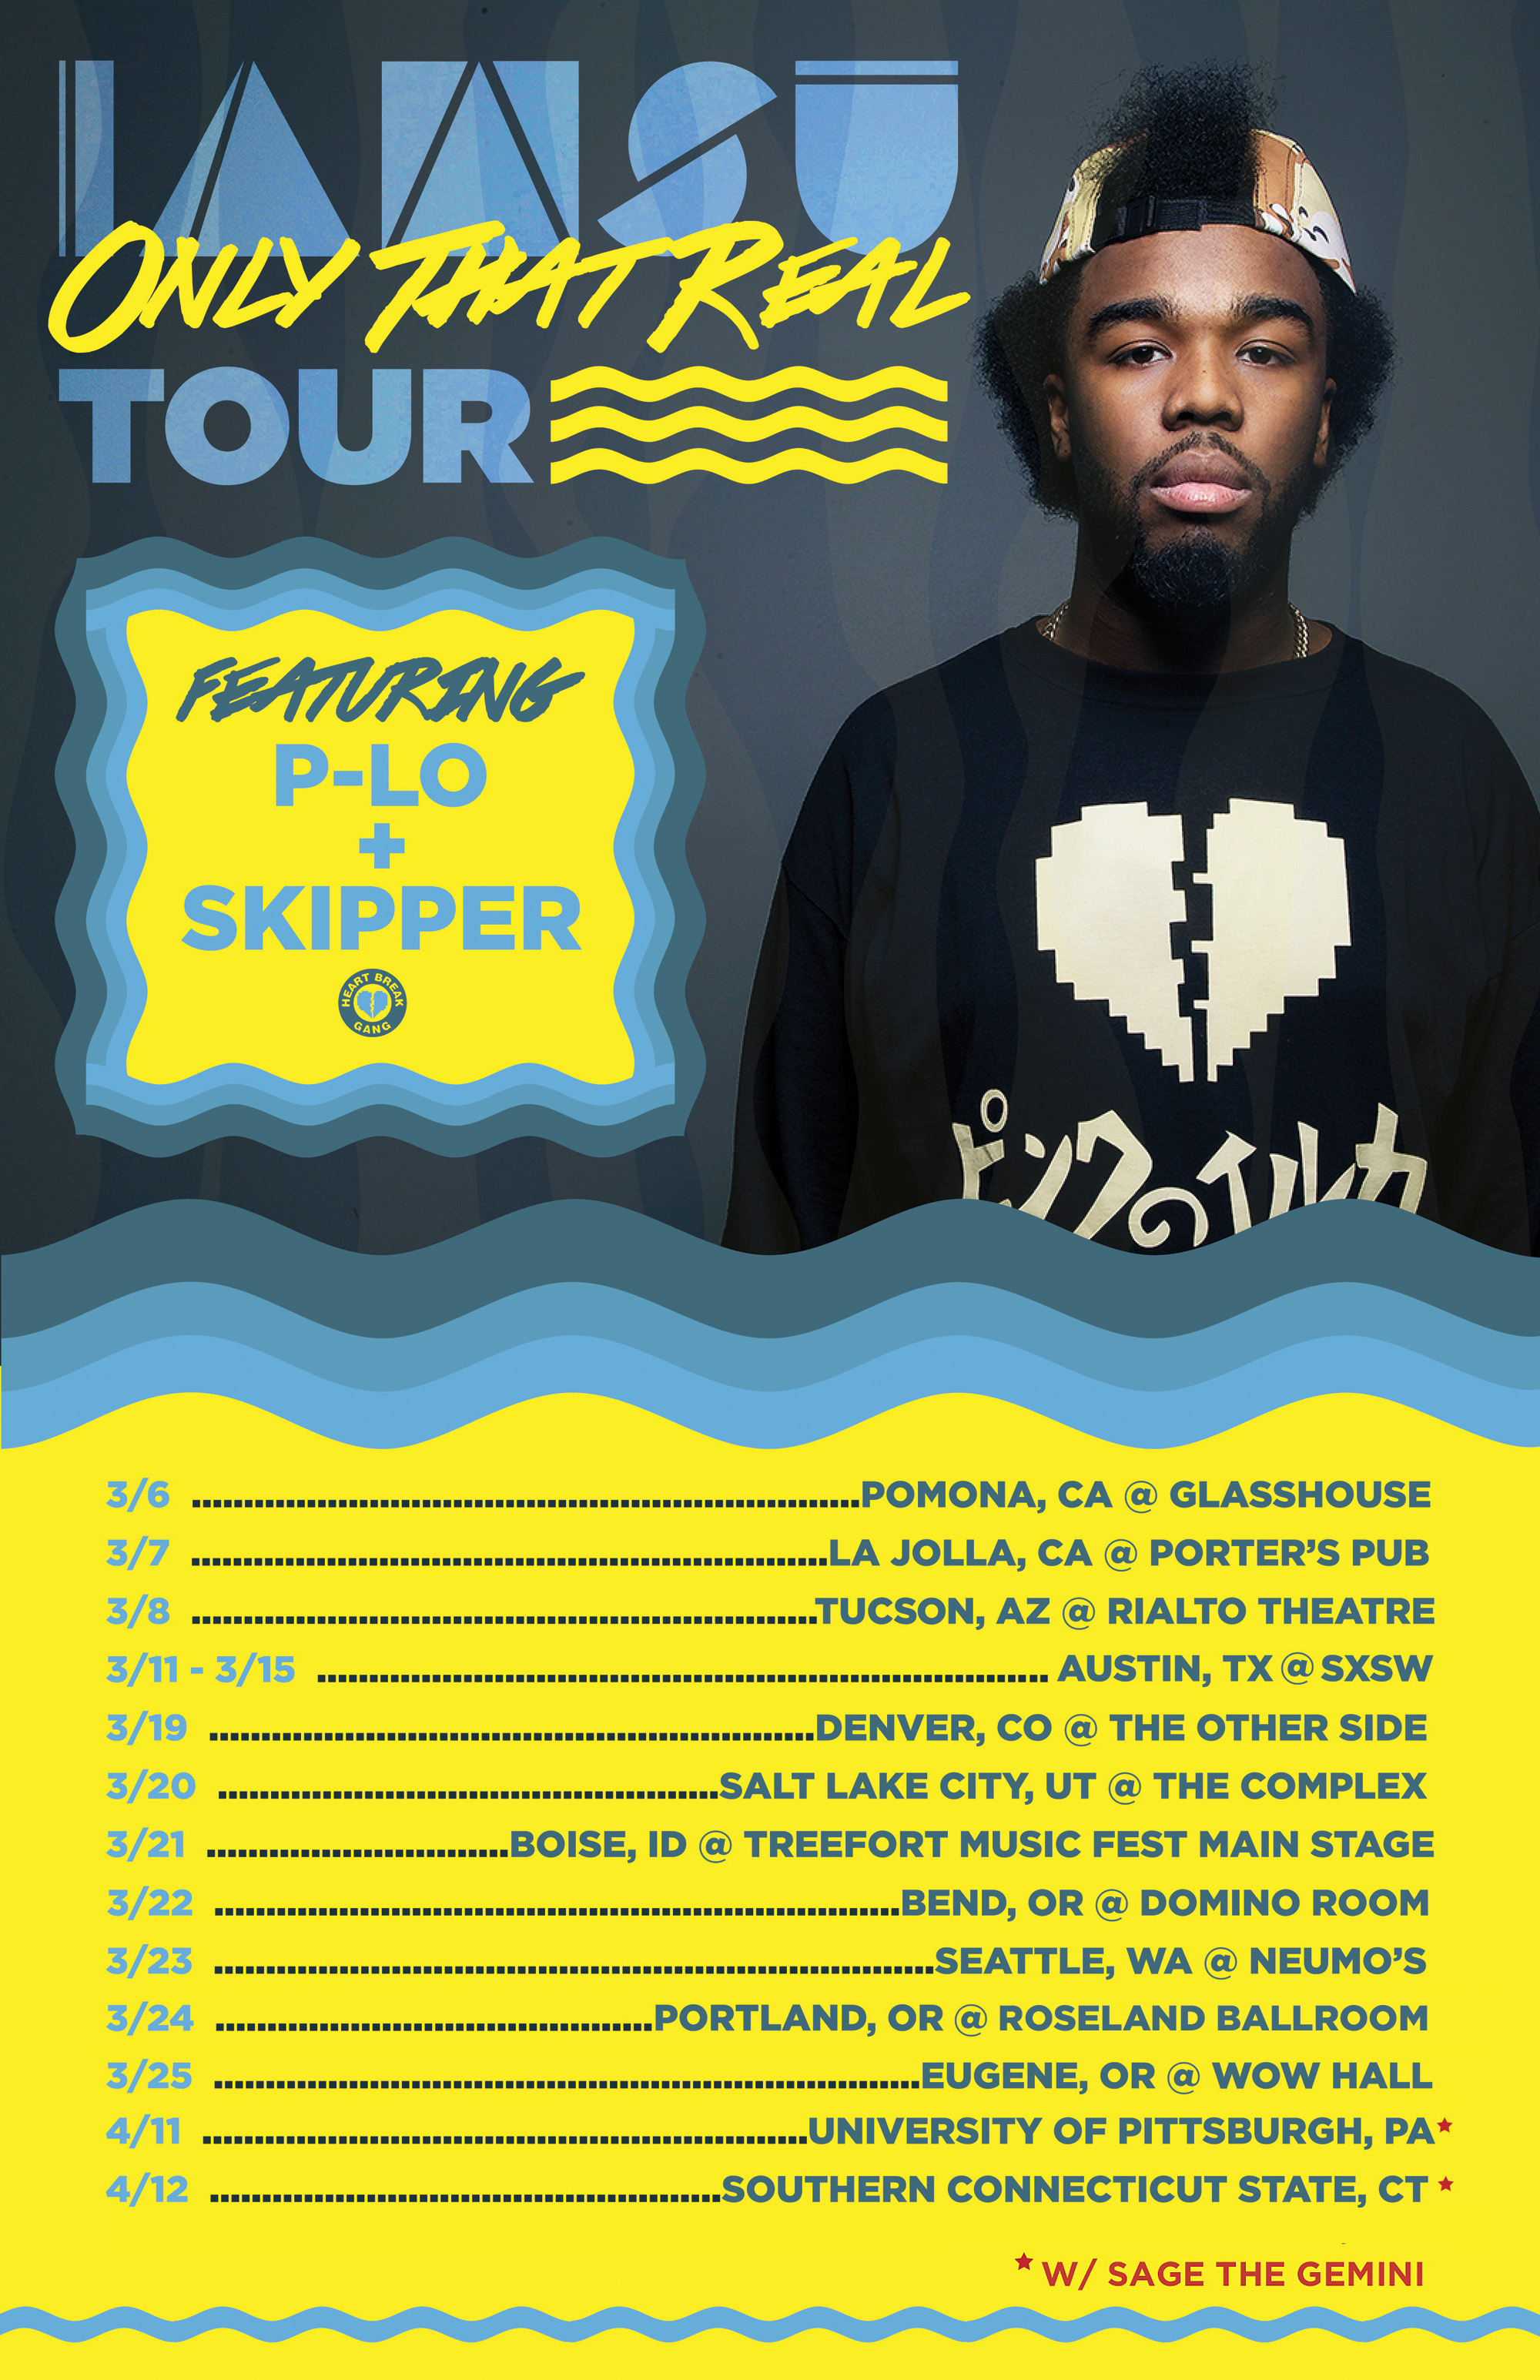 Iamsu! Only That Real Tour